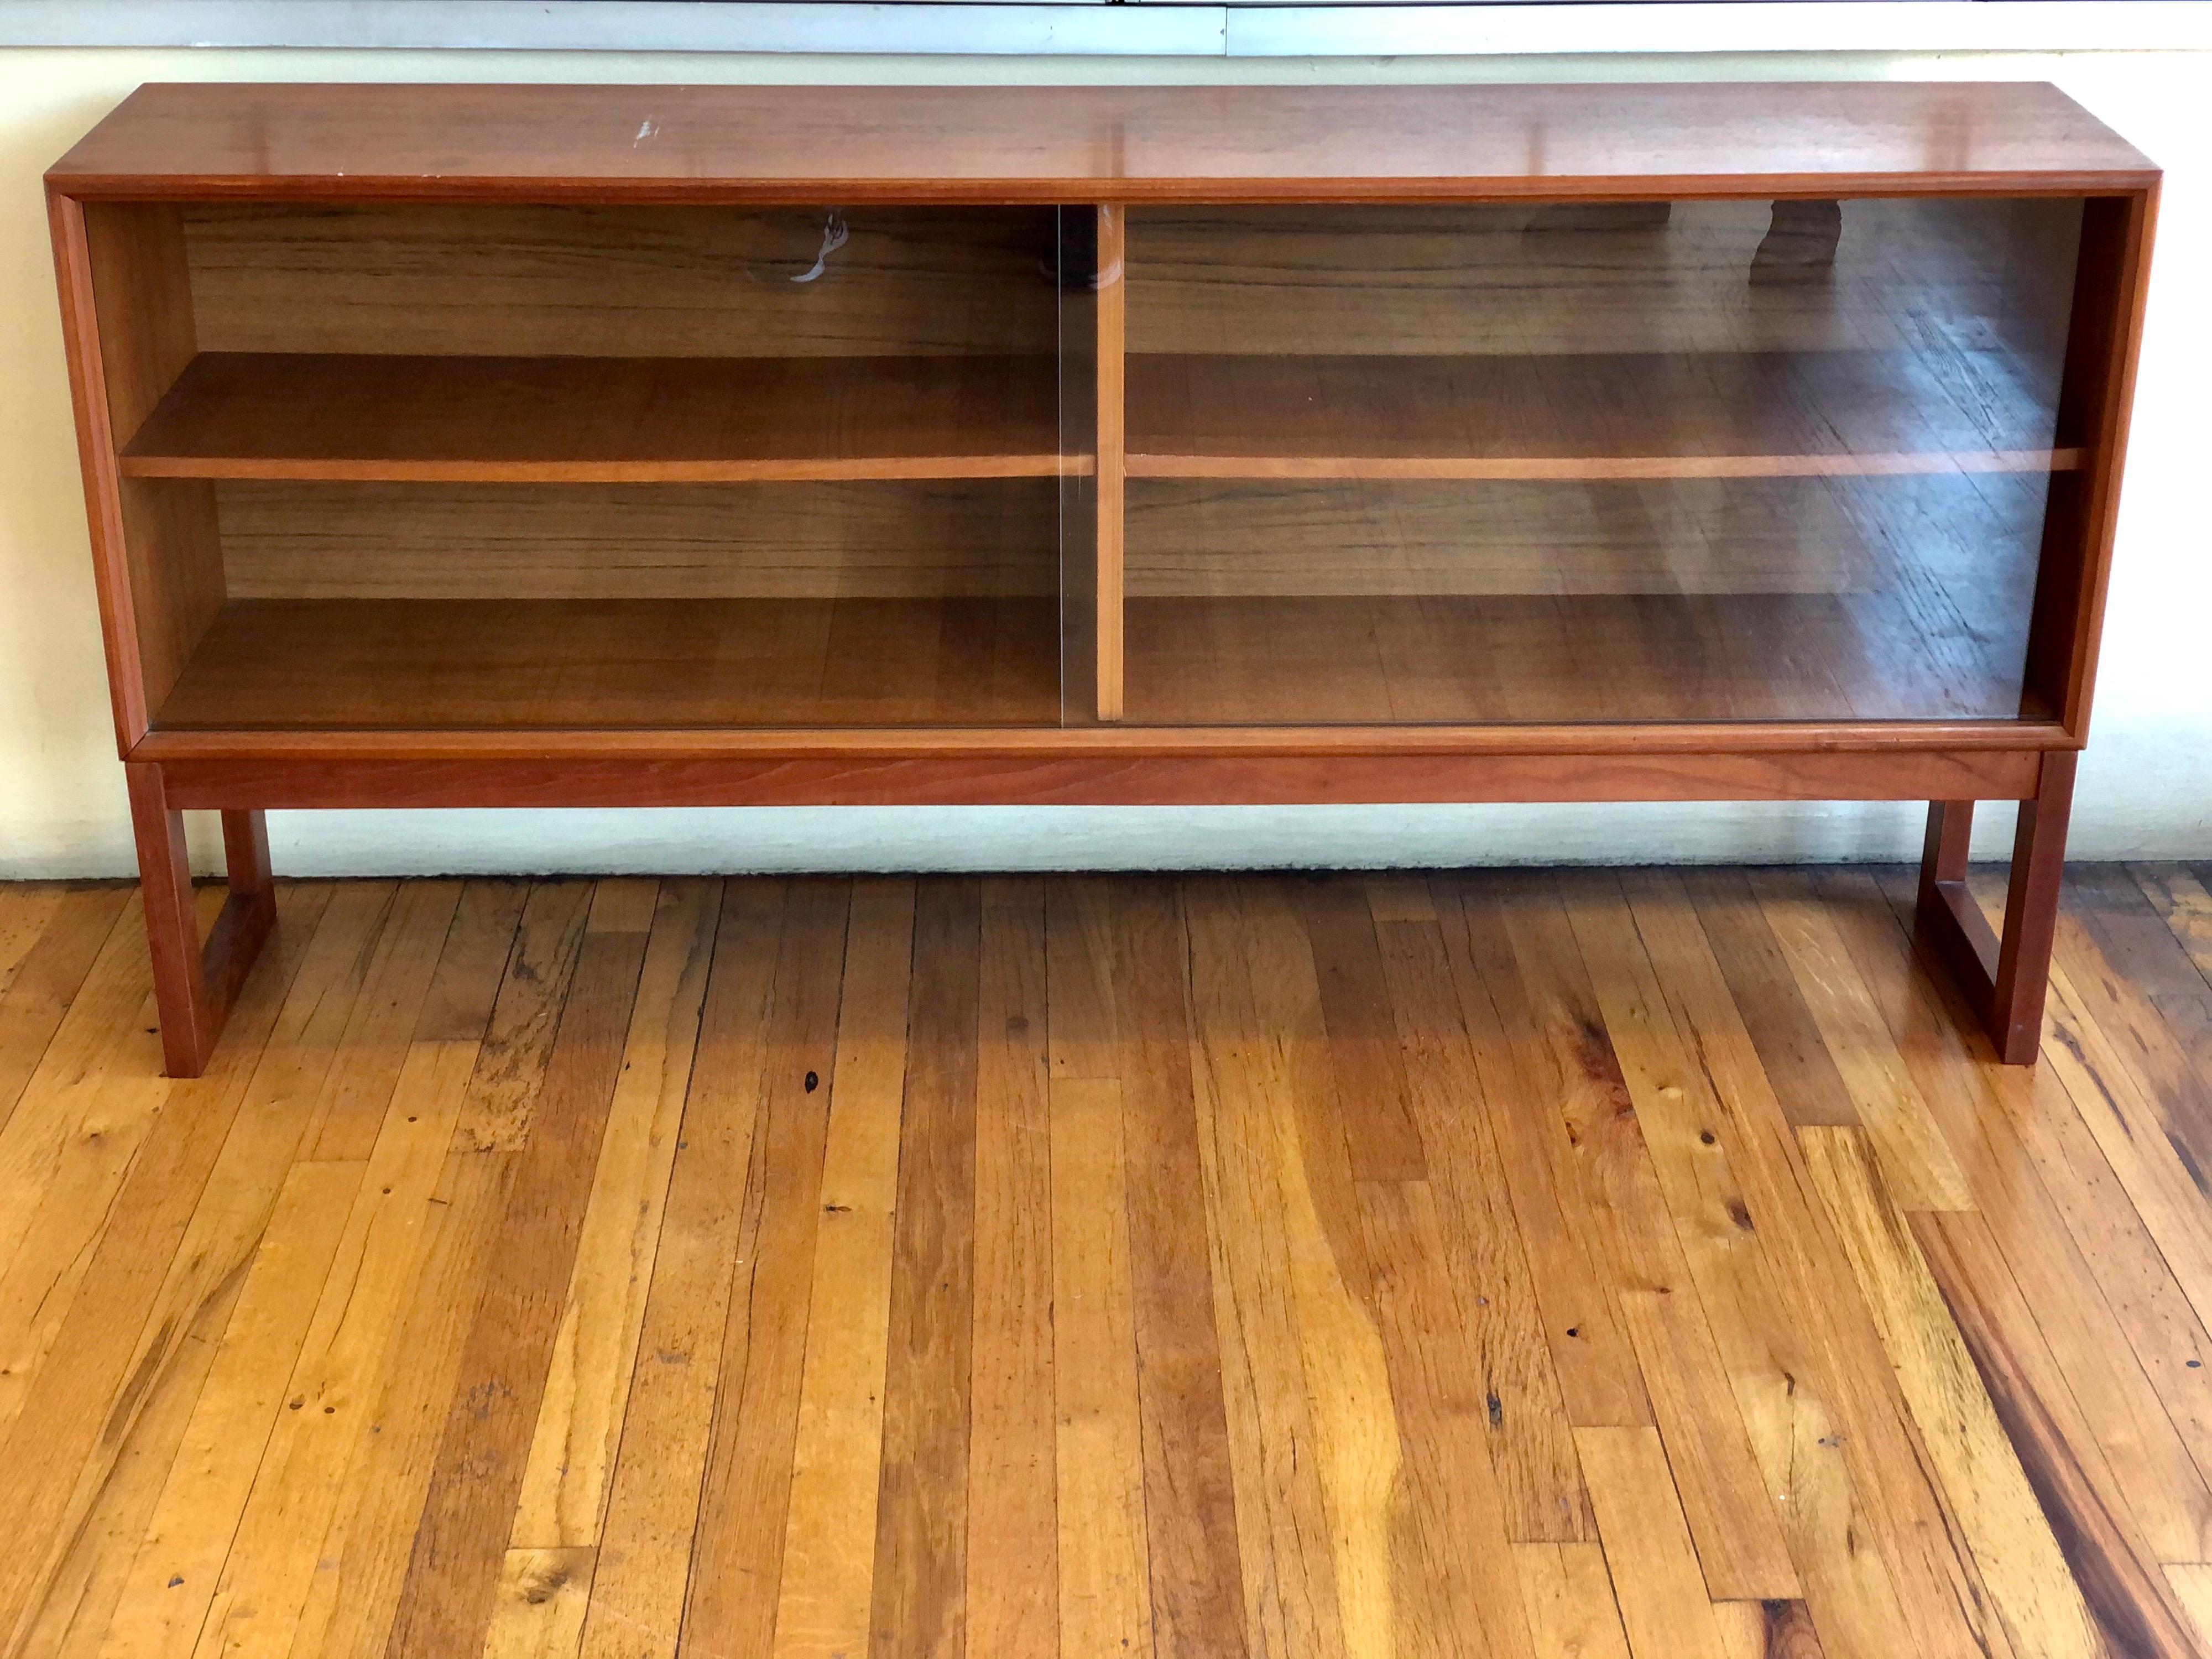 Versatile low cabinet bookcase in teak with glass sliding doors designed by Gunni Omann, for ACO Mobler Denmark, circa 1960's nice condition we have lightly sanded and oiled the piece looks great. With removable shelves.